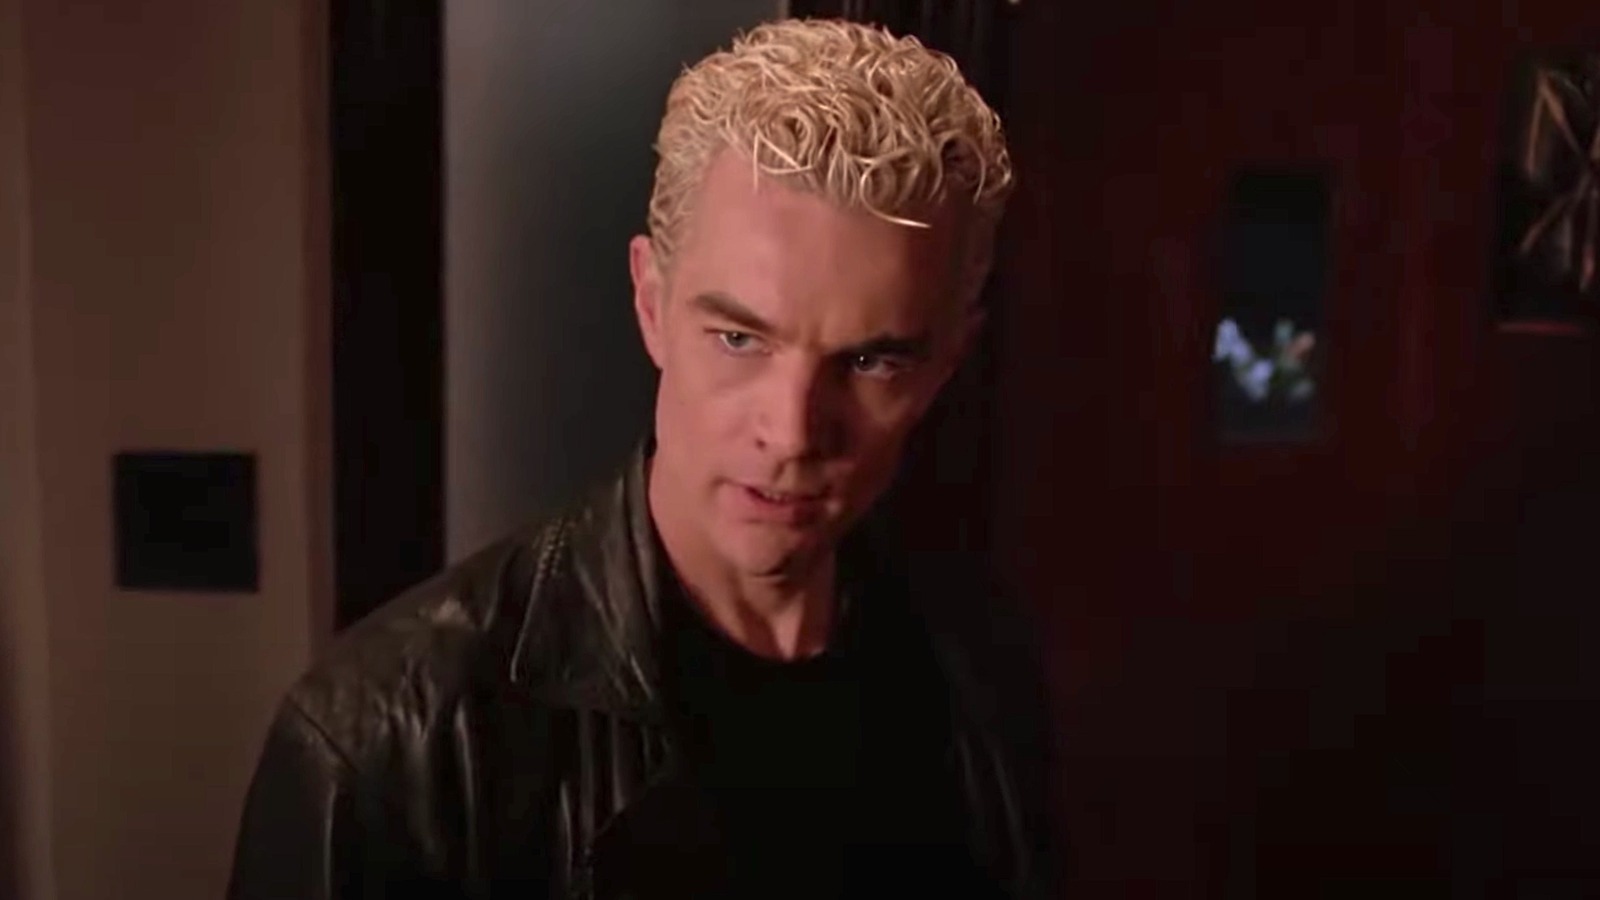 https://www.looper.com/img/gallery/buffy-james-marsters-would-have-killed-spike-earlier-and-for-a-pretty-good-reason/l-intro-1686072893.jpg